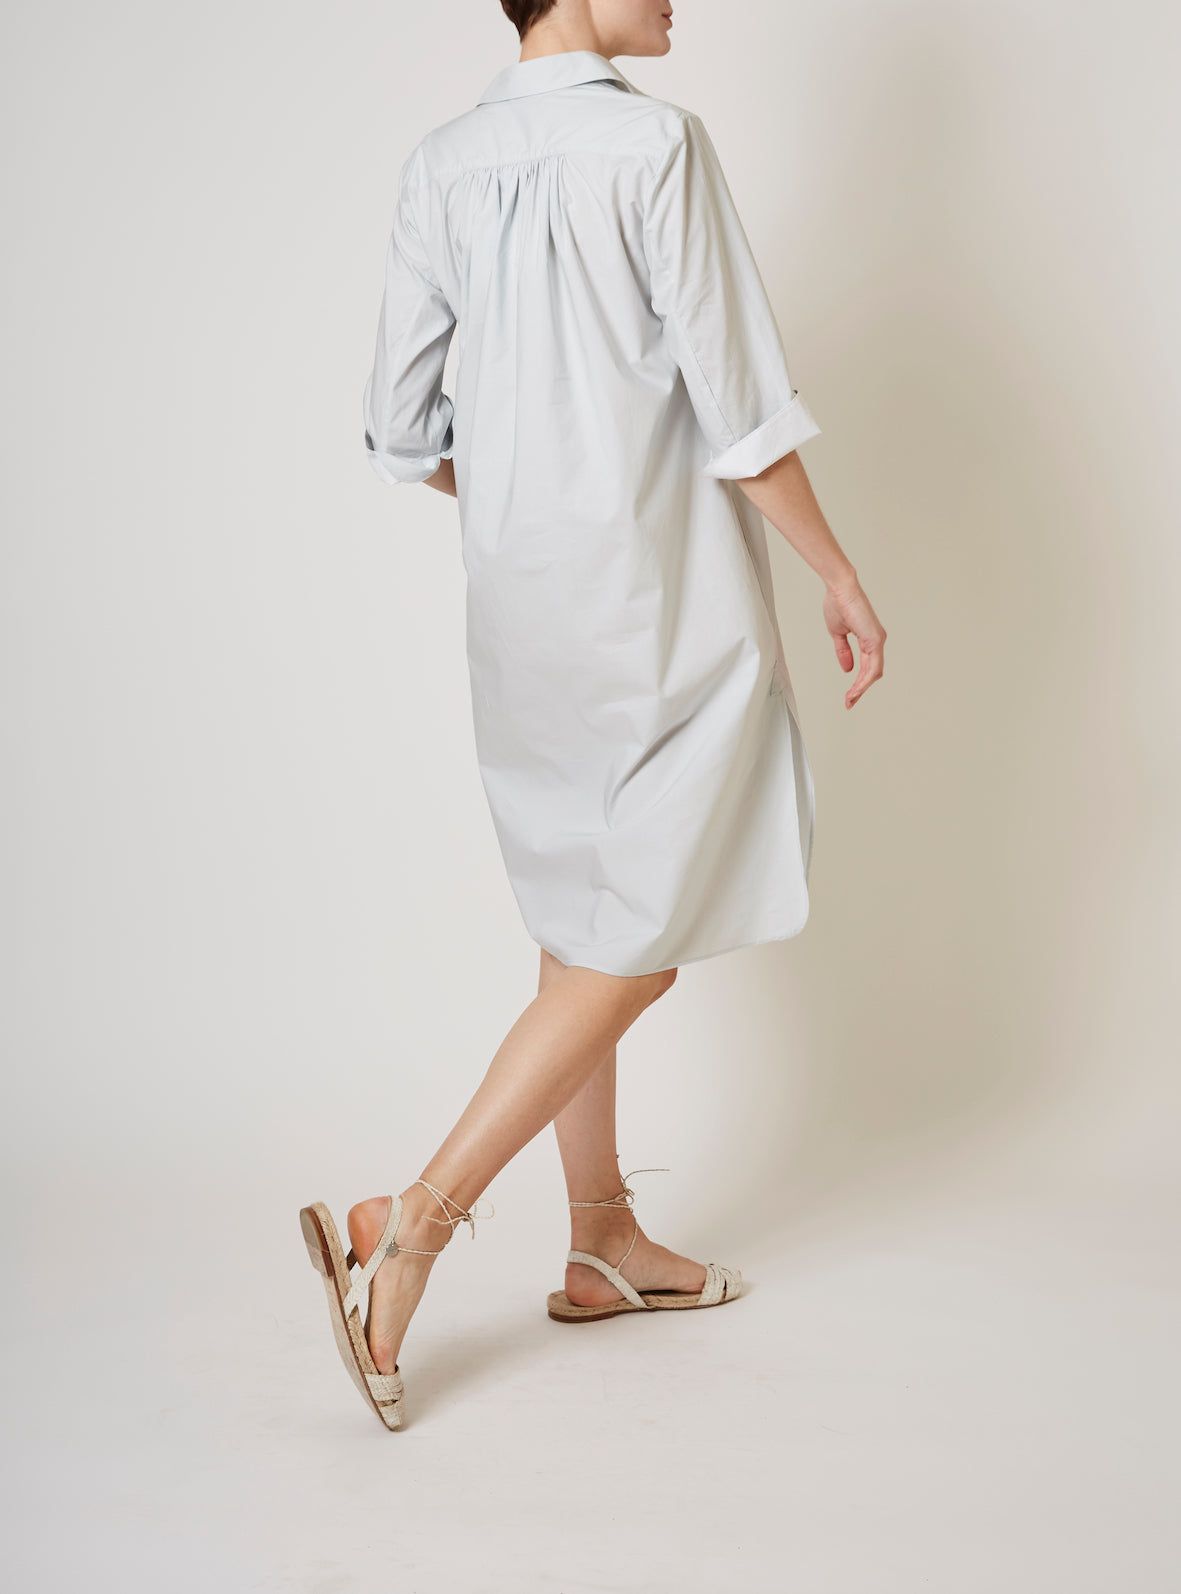 Back view of Angelica Pearl grey shirt Dress by Thierry Colson